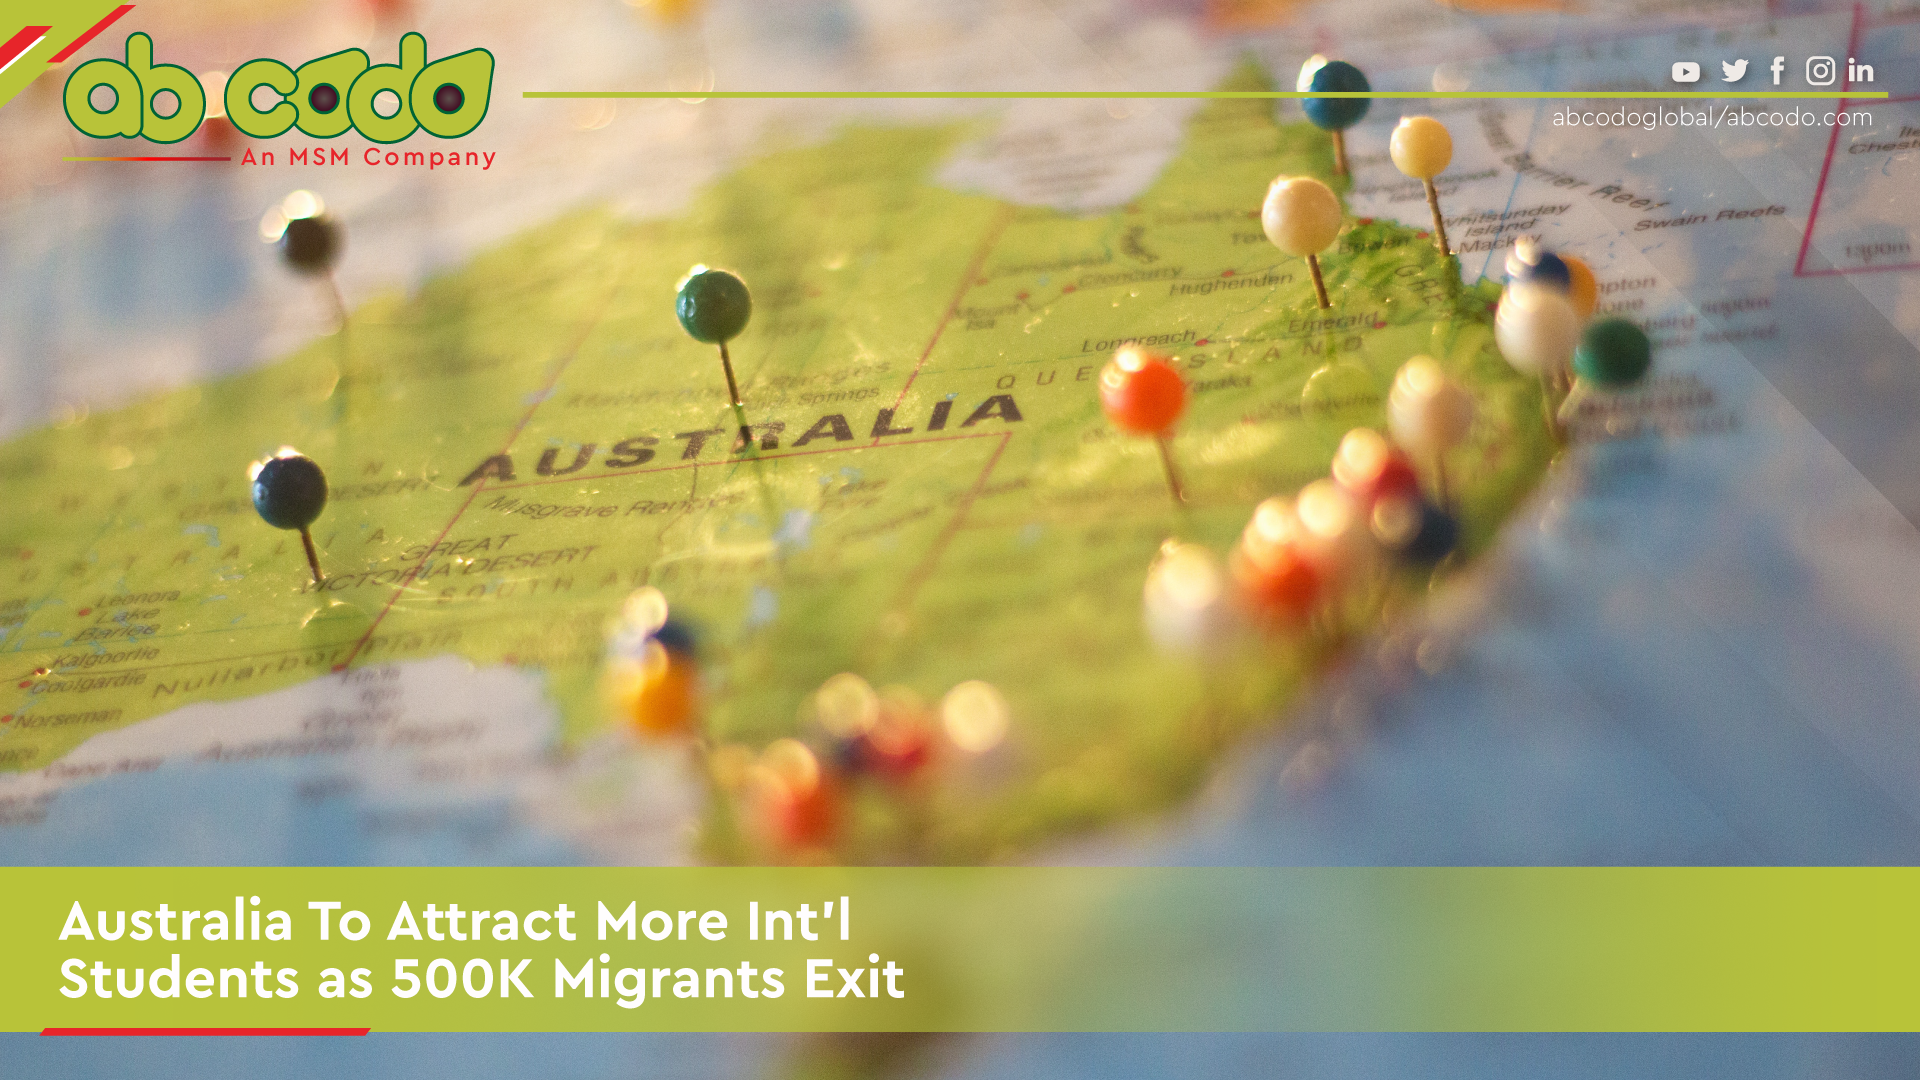 Australia To Attract More Int’l Students as 500K Migrants Exit